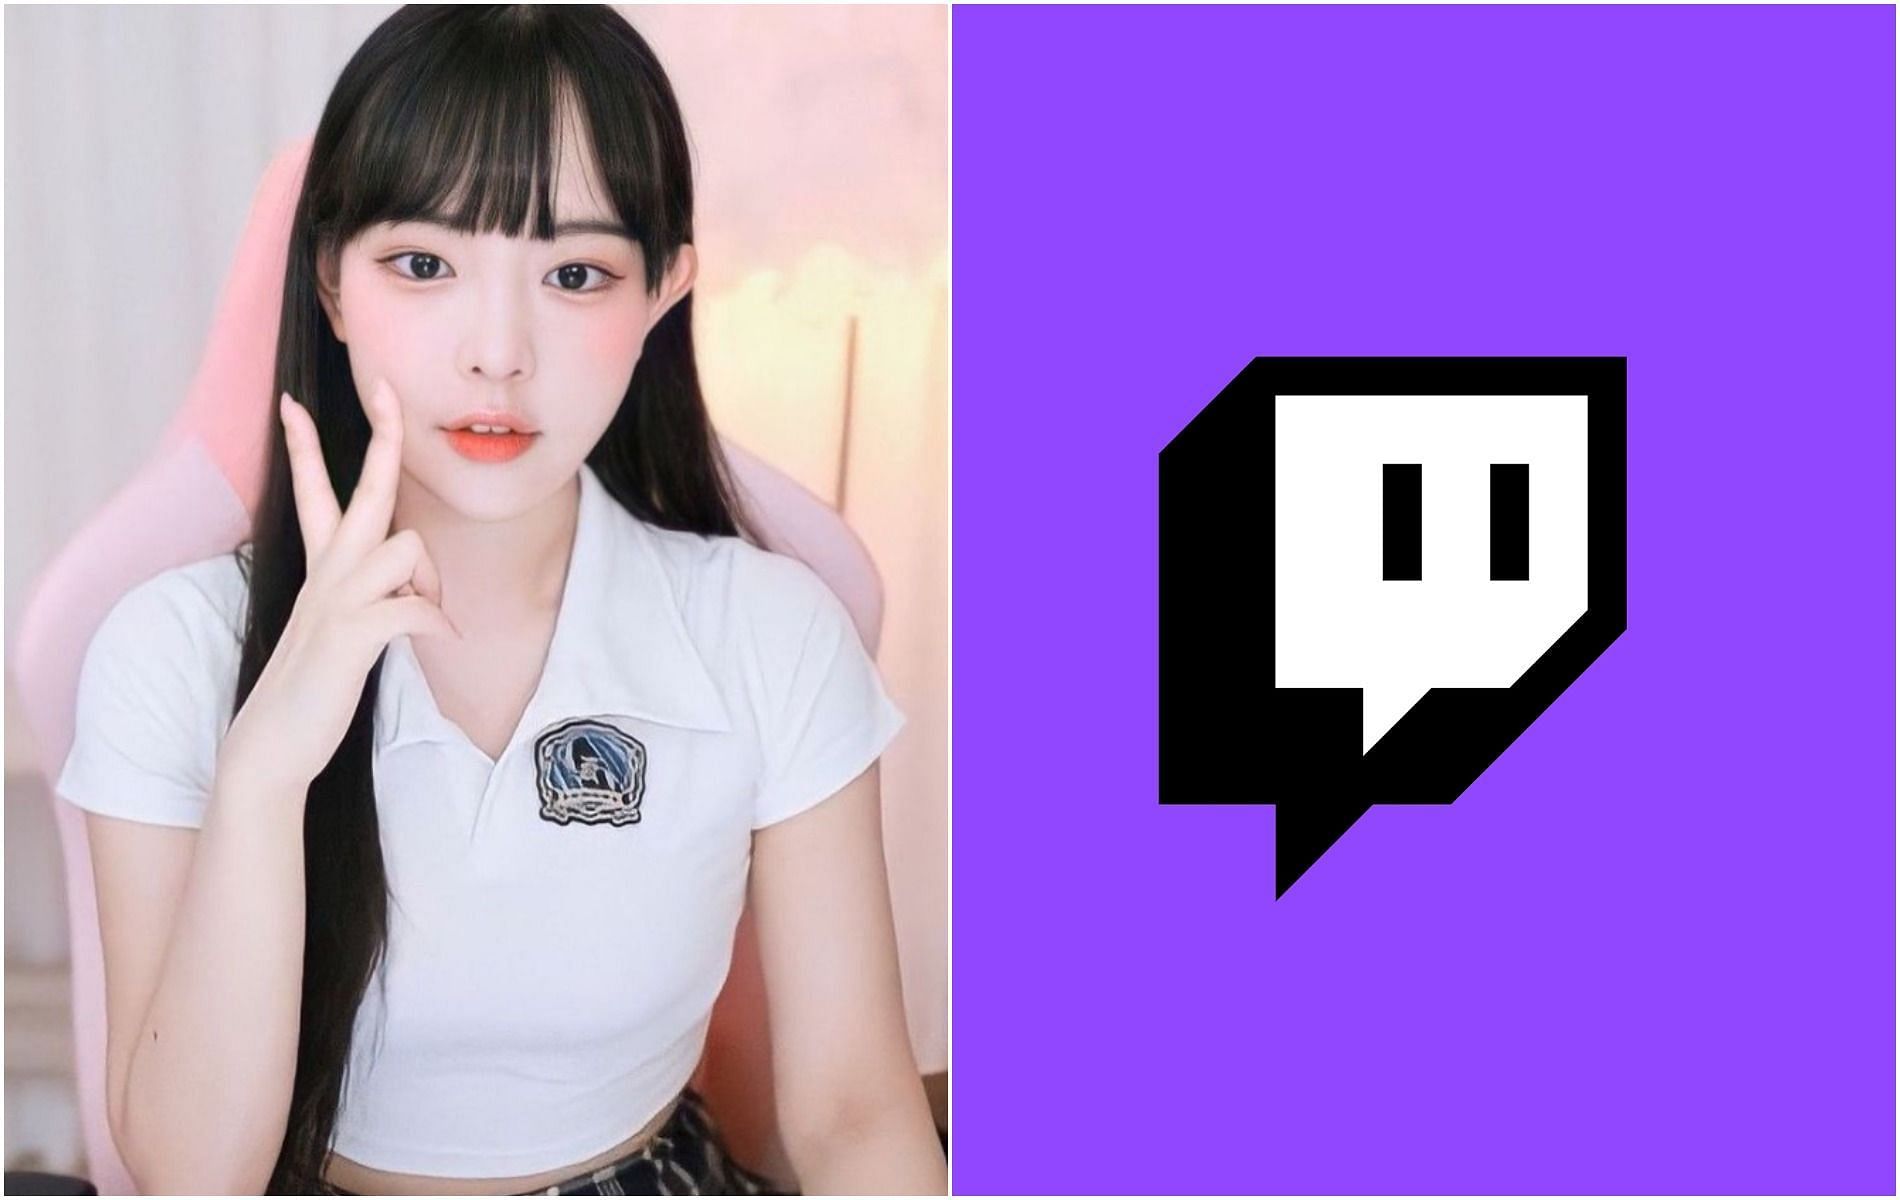 Twitch streamer Jammi95 passes away due to the effects of online bullying and harassment (Image via Sportskeeda)